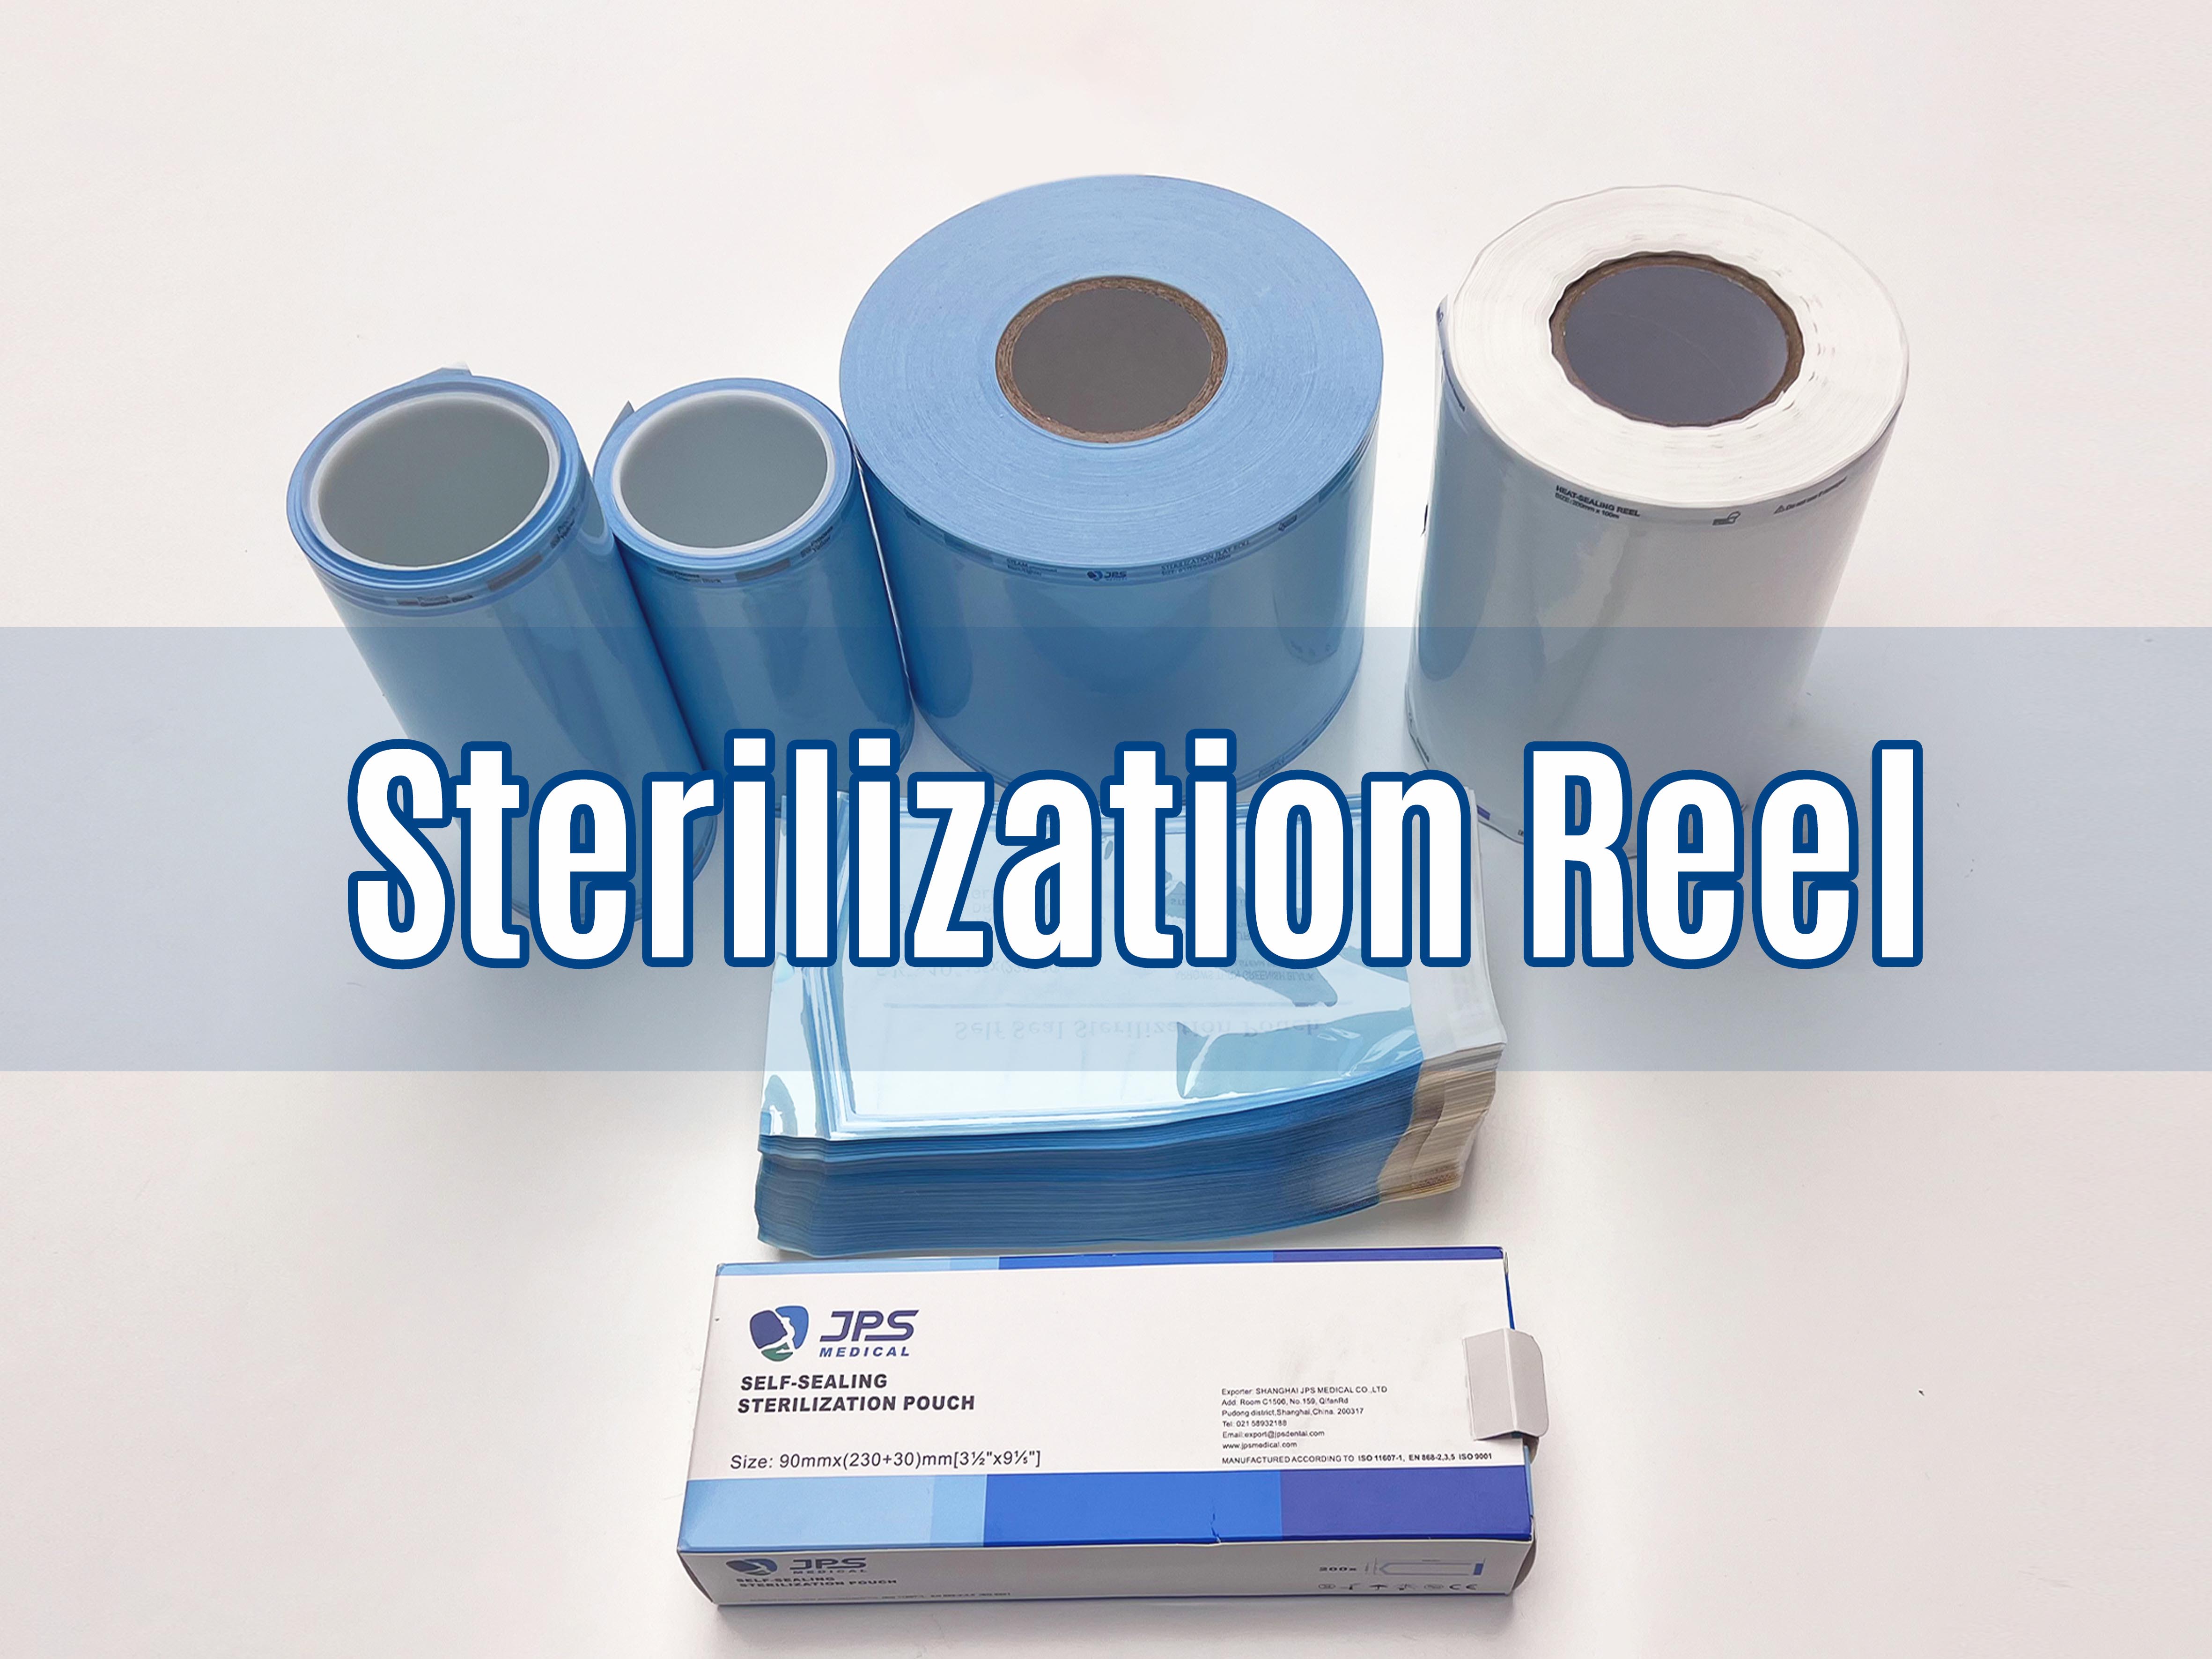 What Is The Function Of Sterilization Reel? What Is Sterilization Roll Used For?